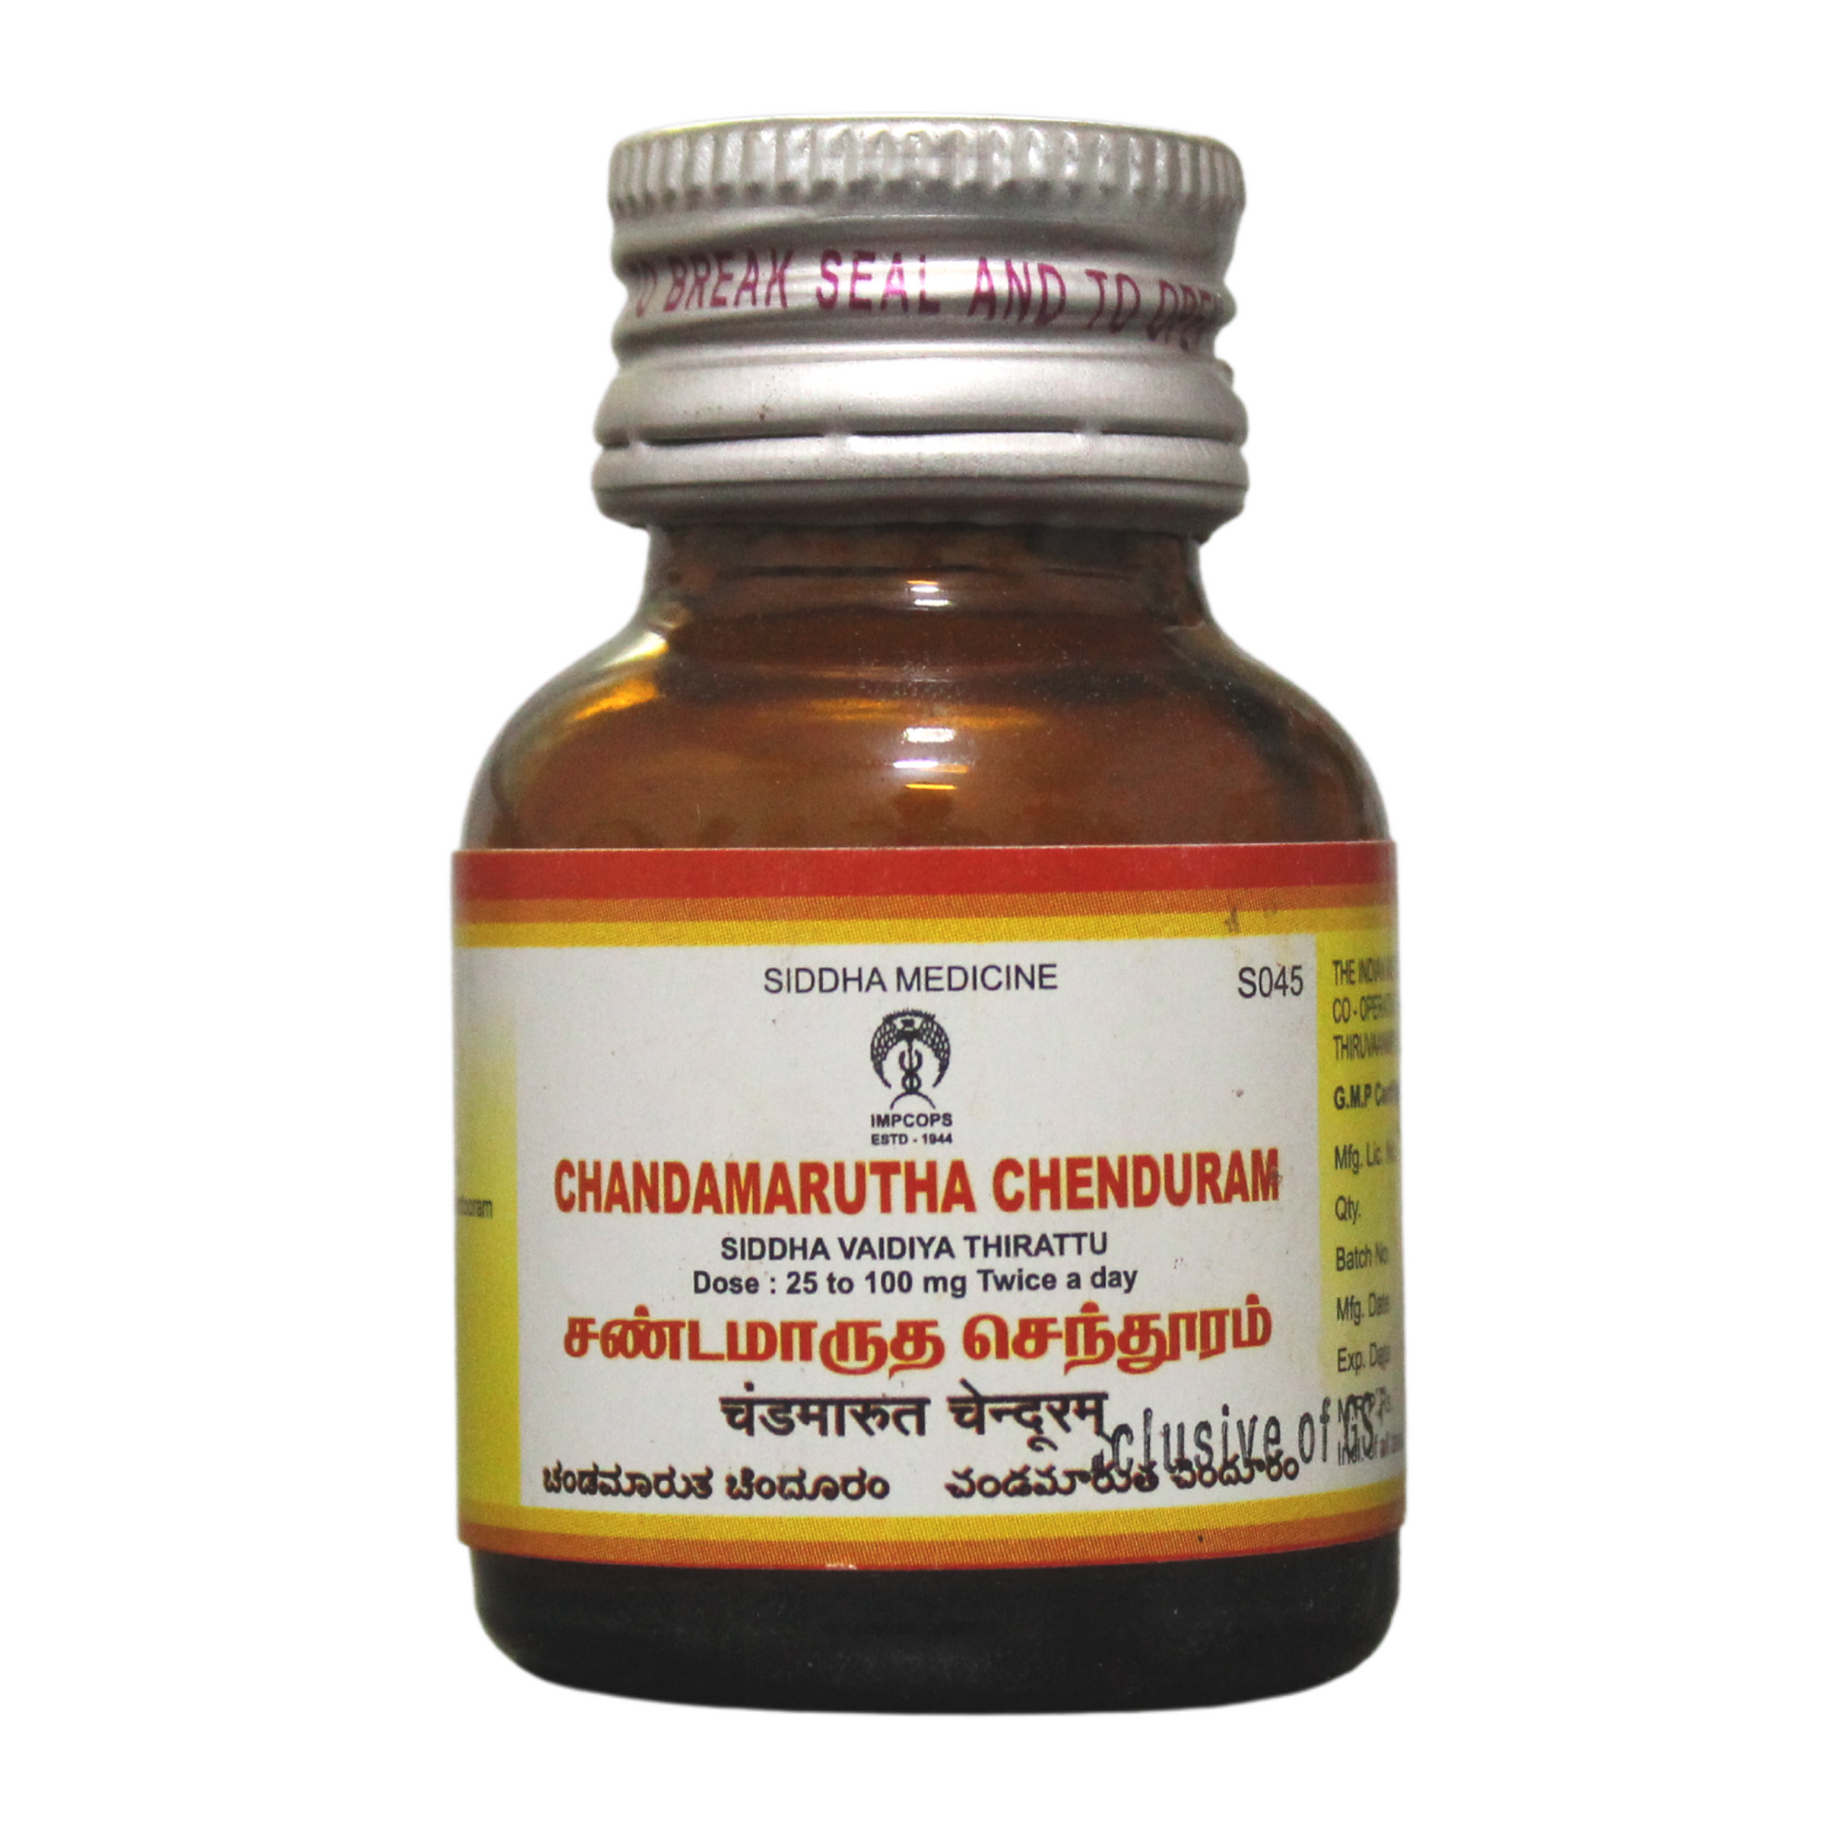 Shop Impcops Chandamarutha Chendooram 10gm at price 226.00 from Impcops Online - Ayush Care